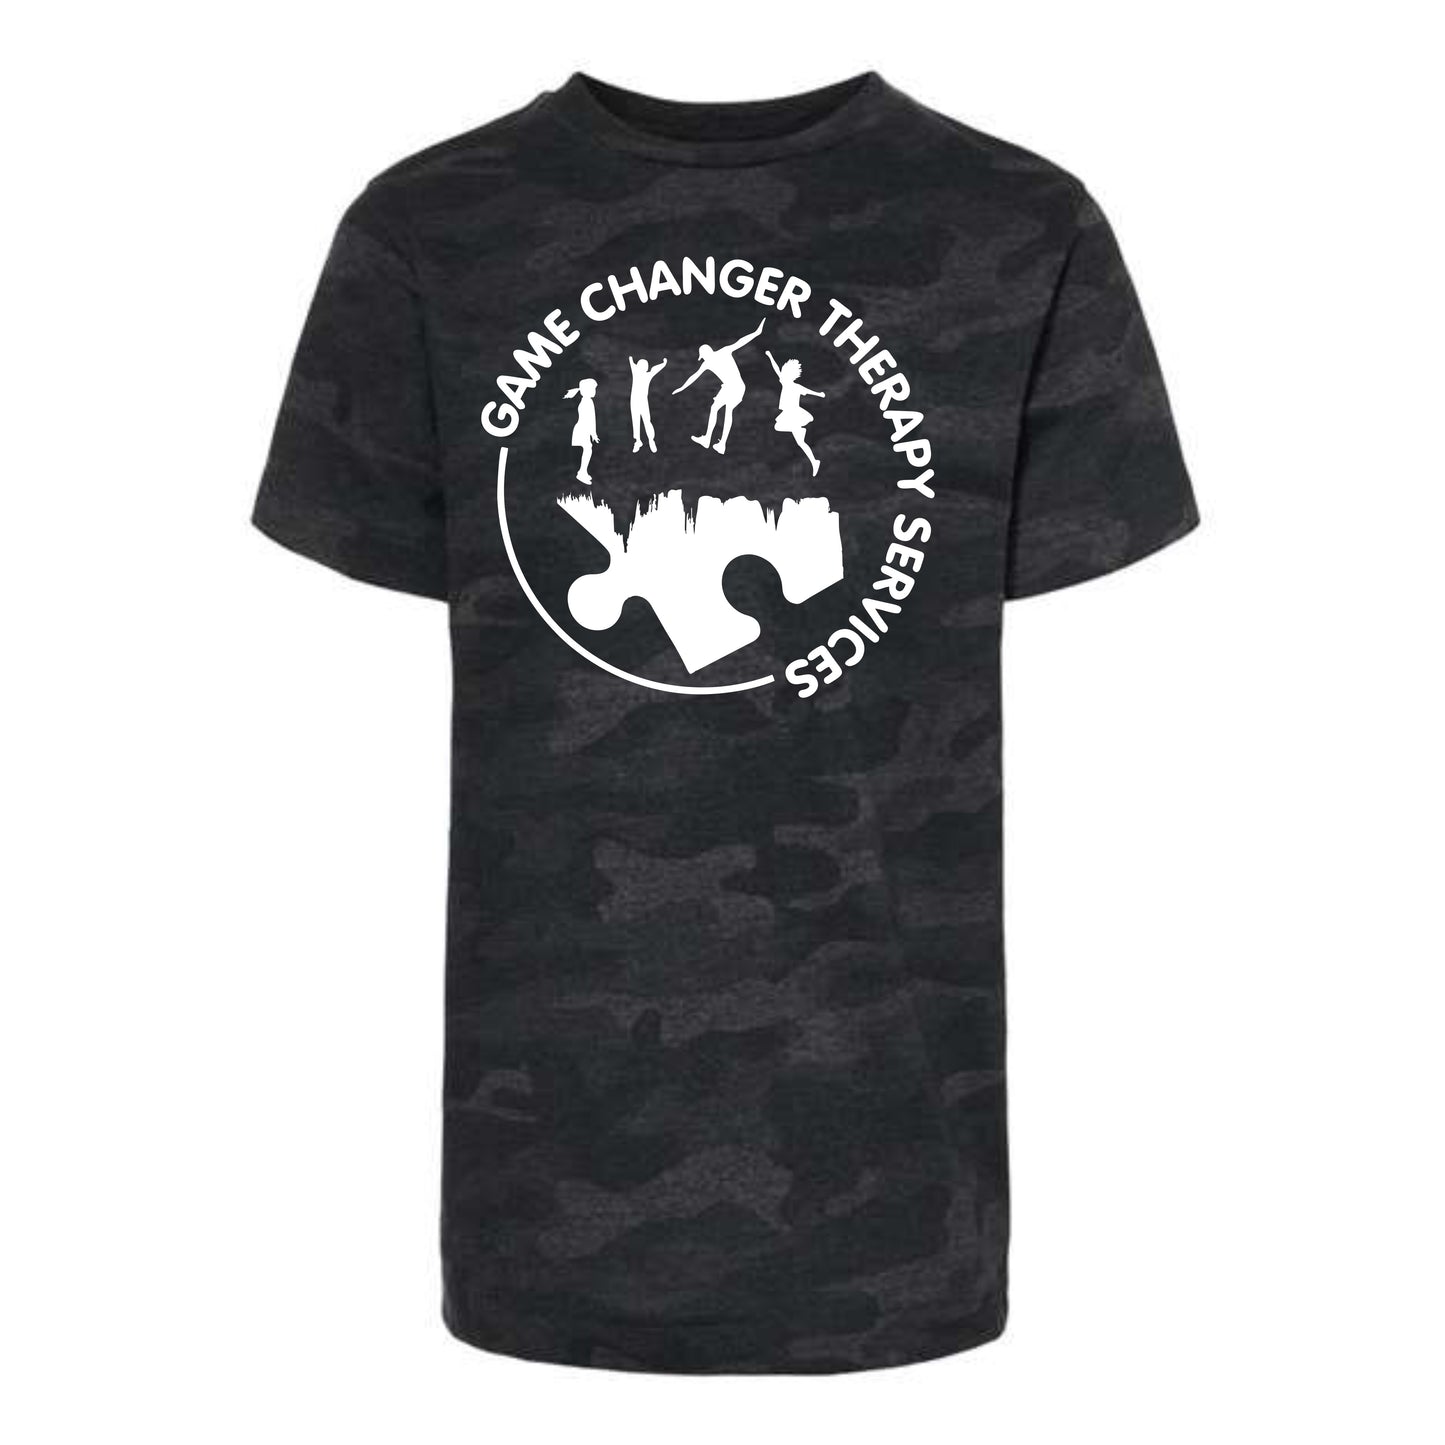 Game Changer Therapy Services Short Sleeve Camo Tee YOUTH SIZES - White Logo